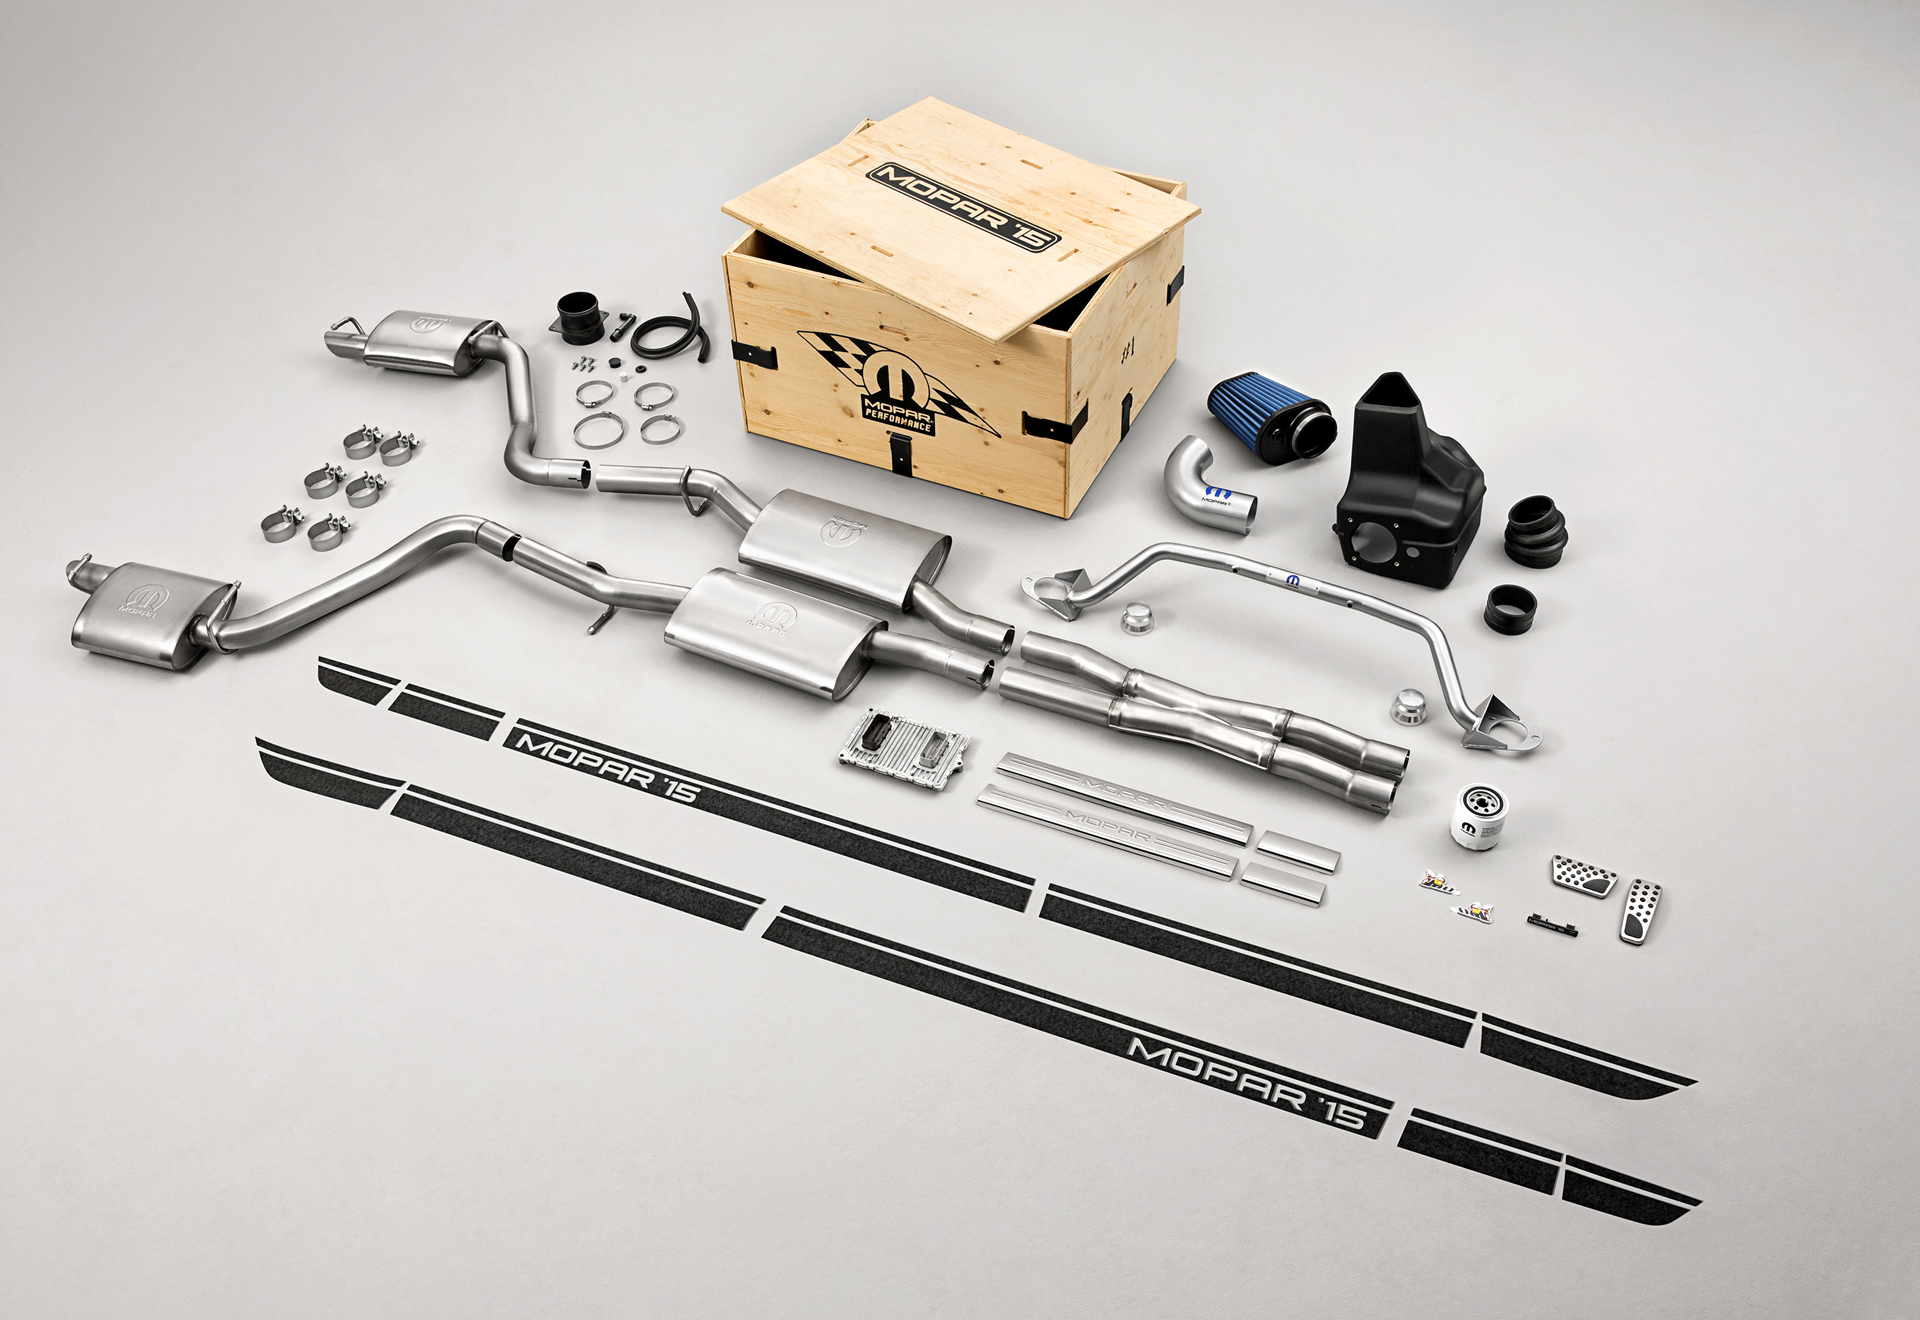 Performance in a Box: Mopar ’15 Performance Kit Launches for 2015 Dodge Charger R/T